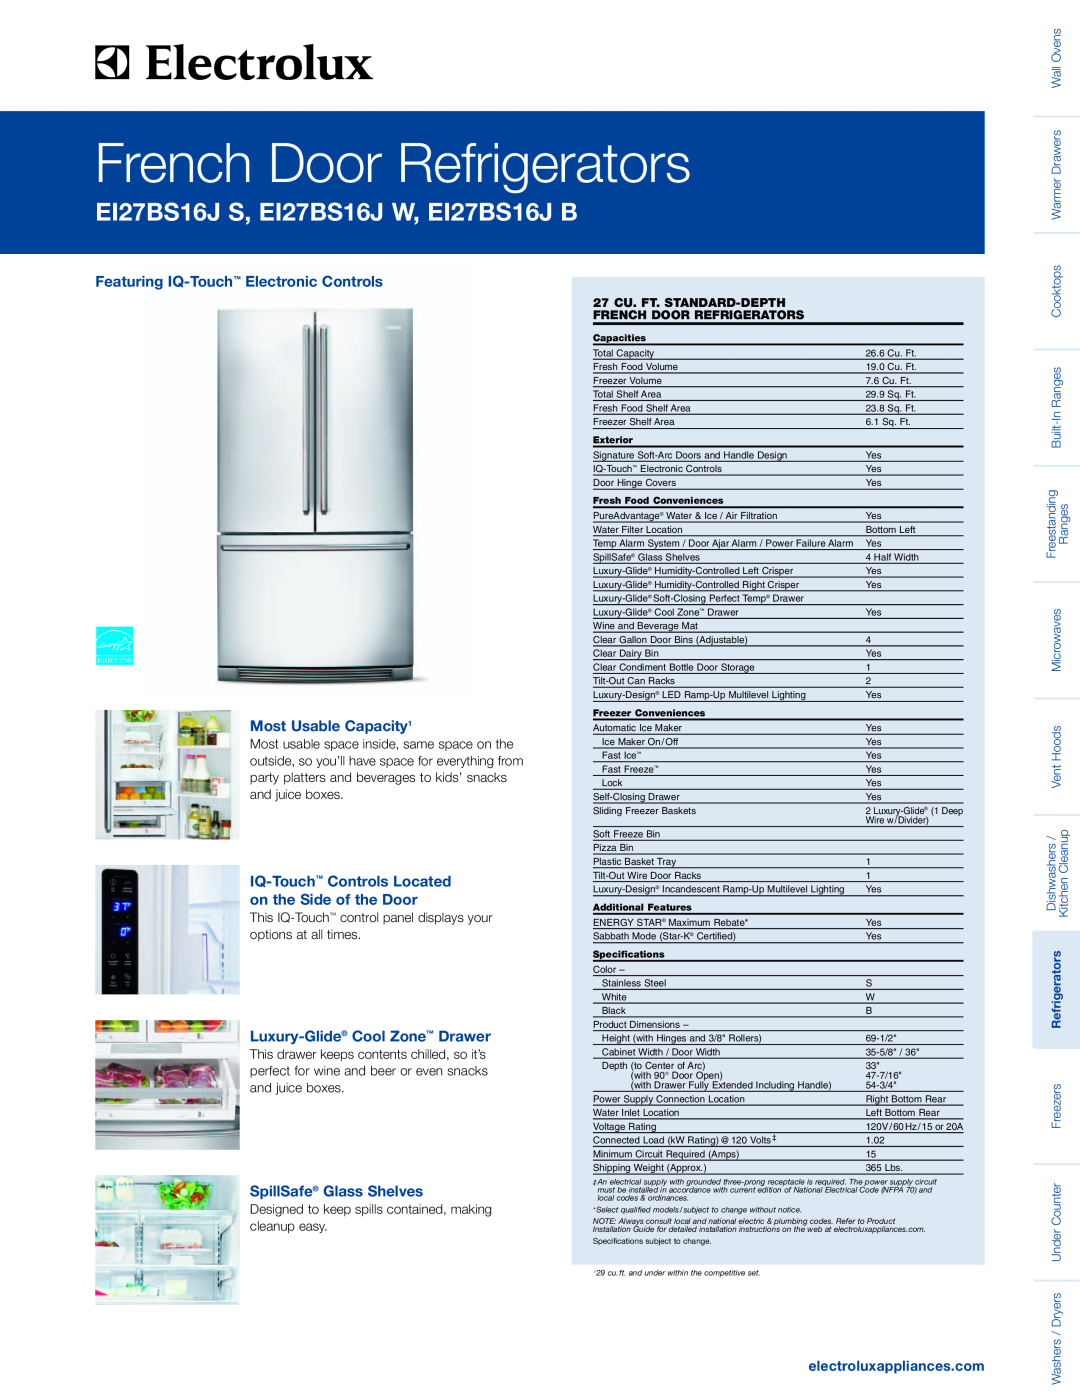 Electrolux EI27BS16J W specifications Featuring IQ-Touch Electronic Controls Most Usable Capacity1, Refrigerators 